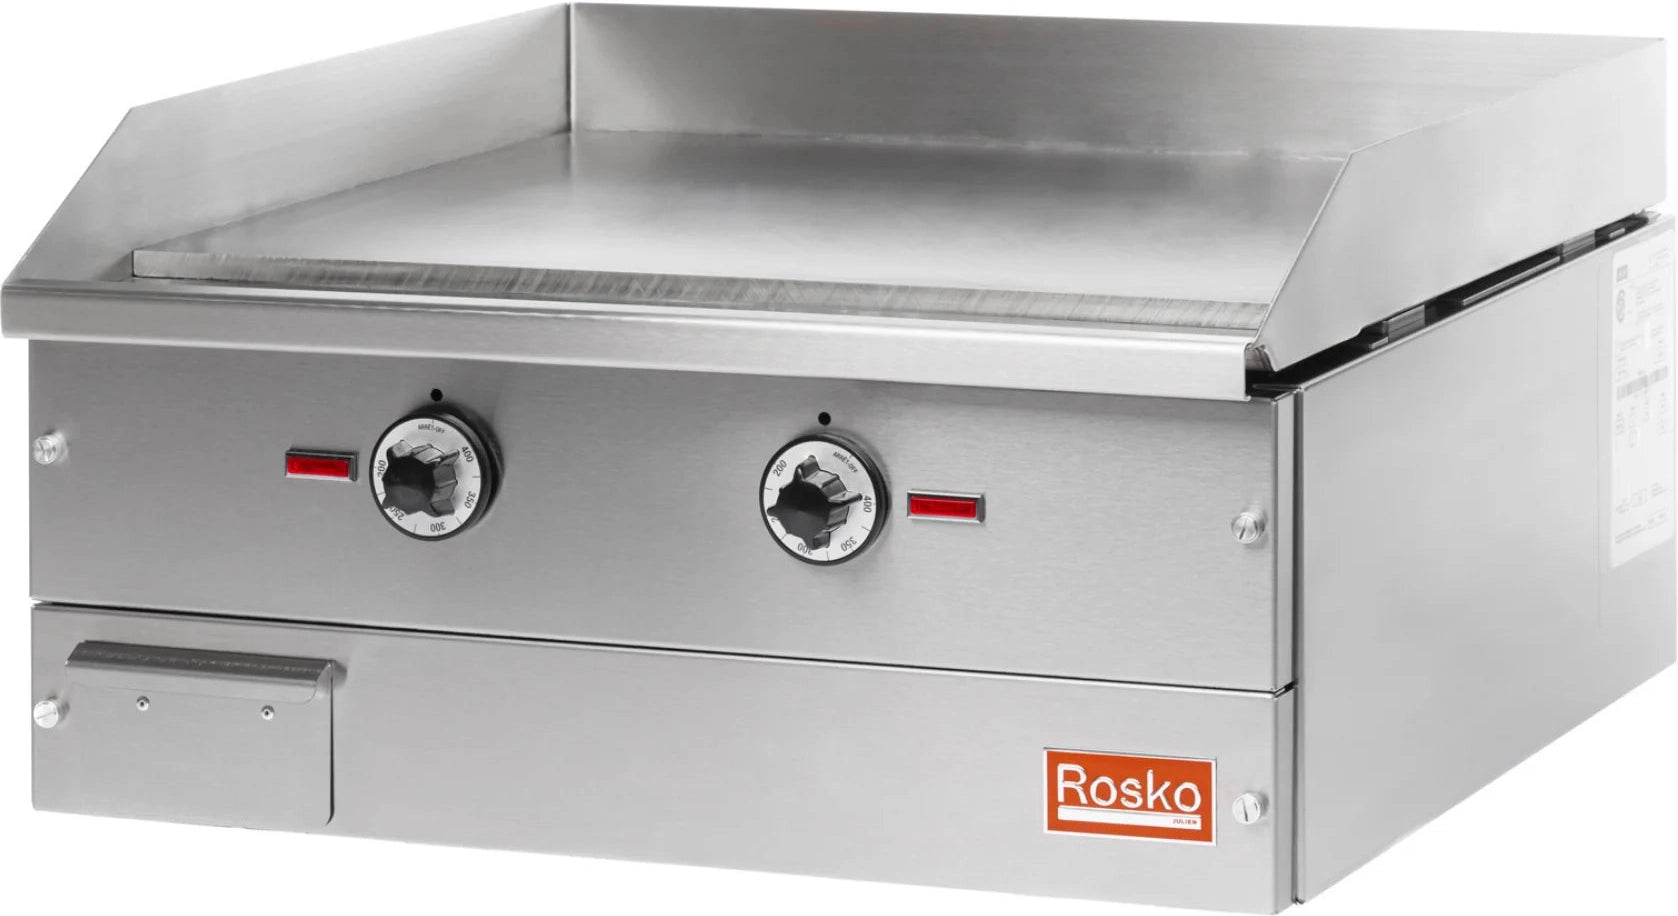 Julien - Rosko 24" Electric Countertop Griddle, 8000 W, 208 V, Chrome Plated - RO-GCE-24-1-CP